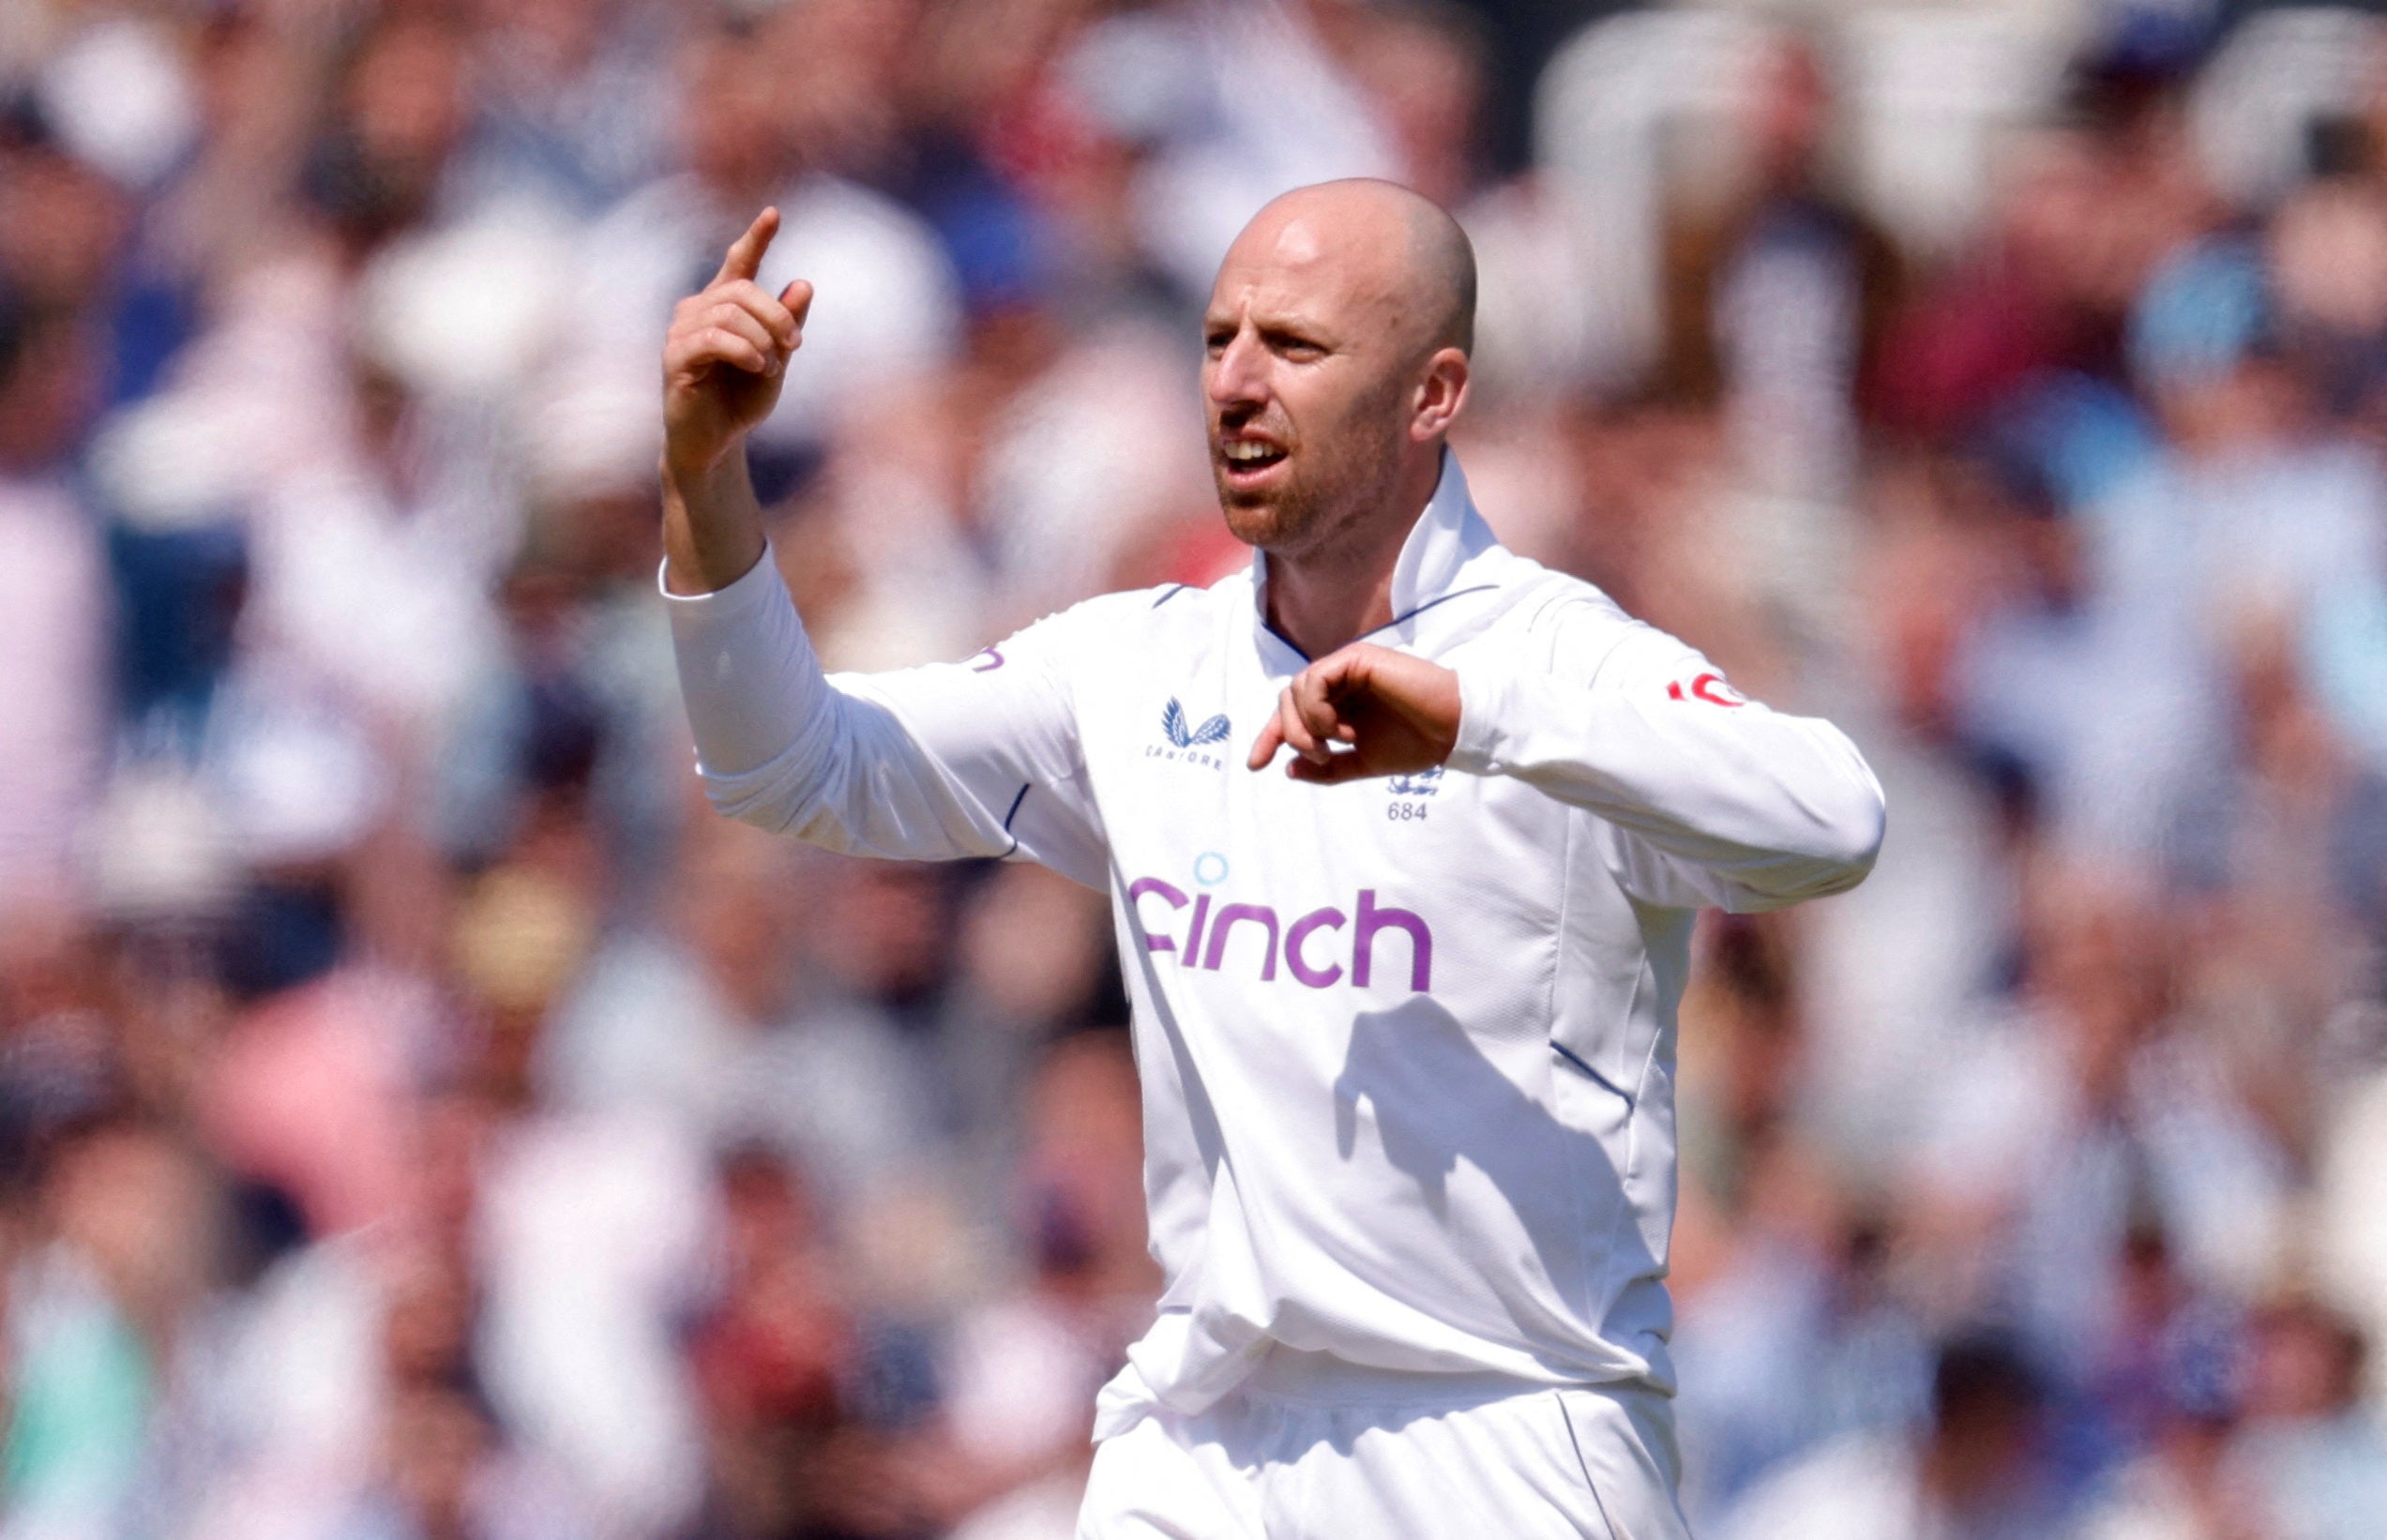 Jack Leach will be a huge loss for England